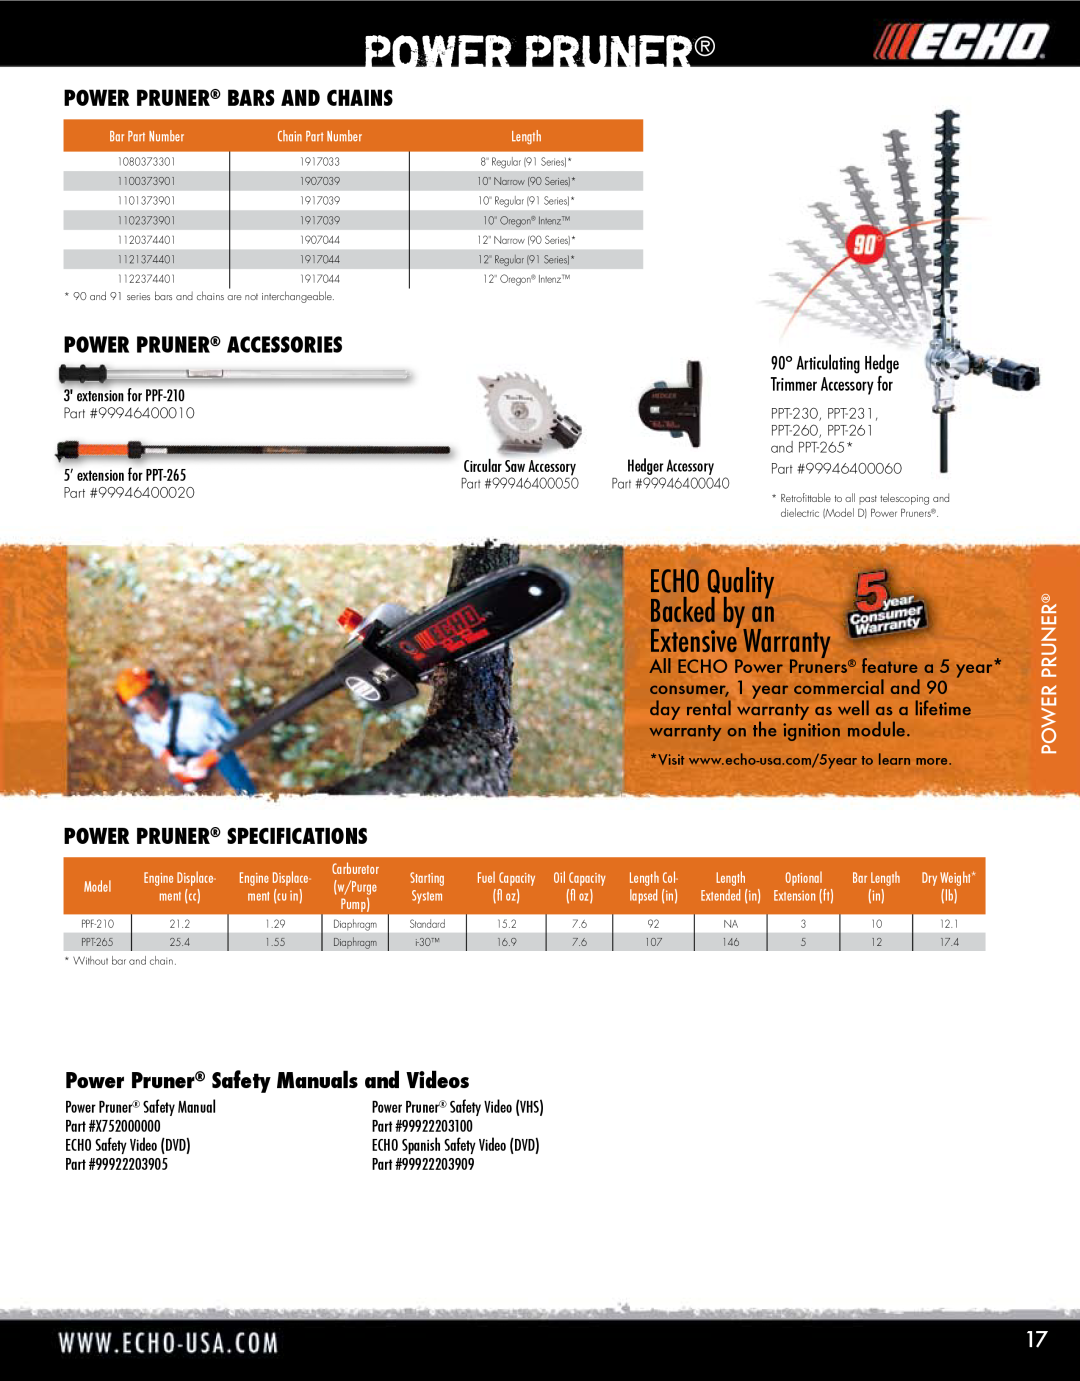 Echo HV-110XG manual ECHO Quality Backed by an Extensive Warranty, Power Pruner Bars And Chains, Power Pruner Accessories 